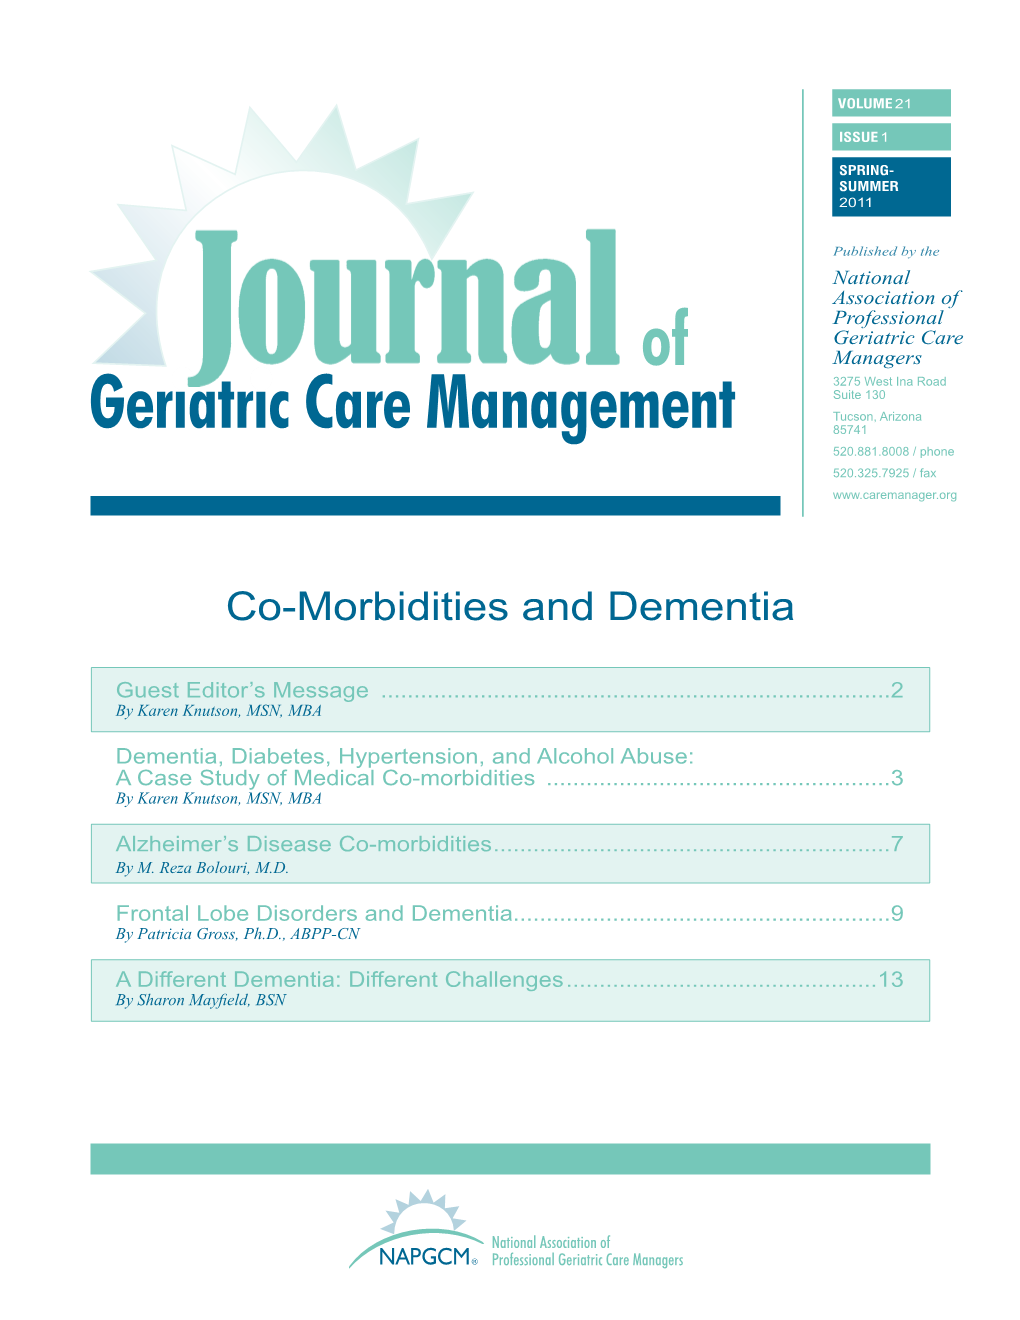 Co-Morbidities and Dementia